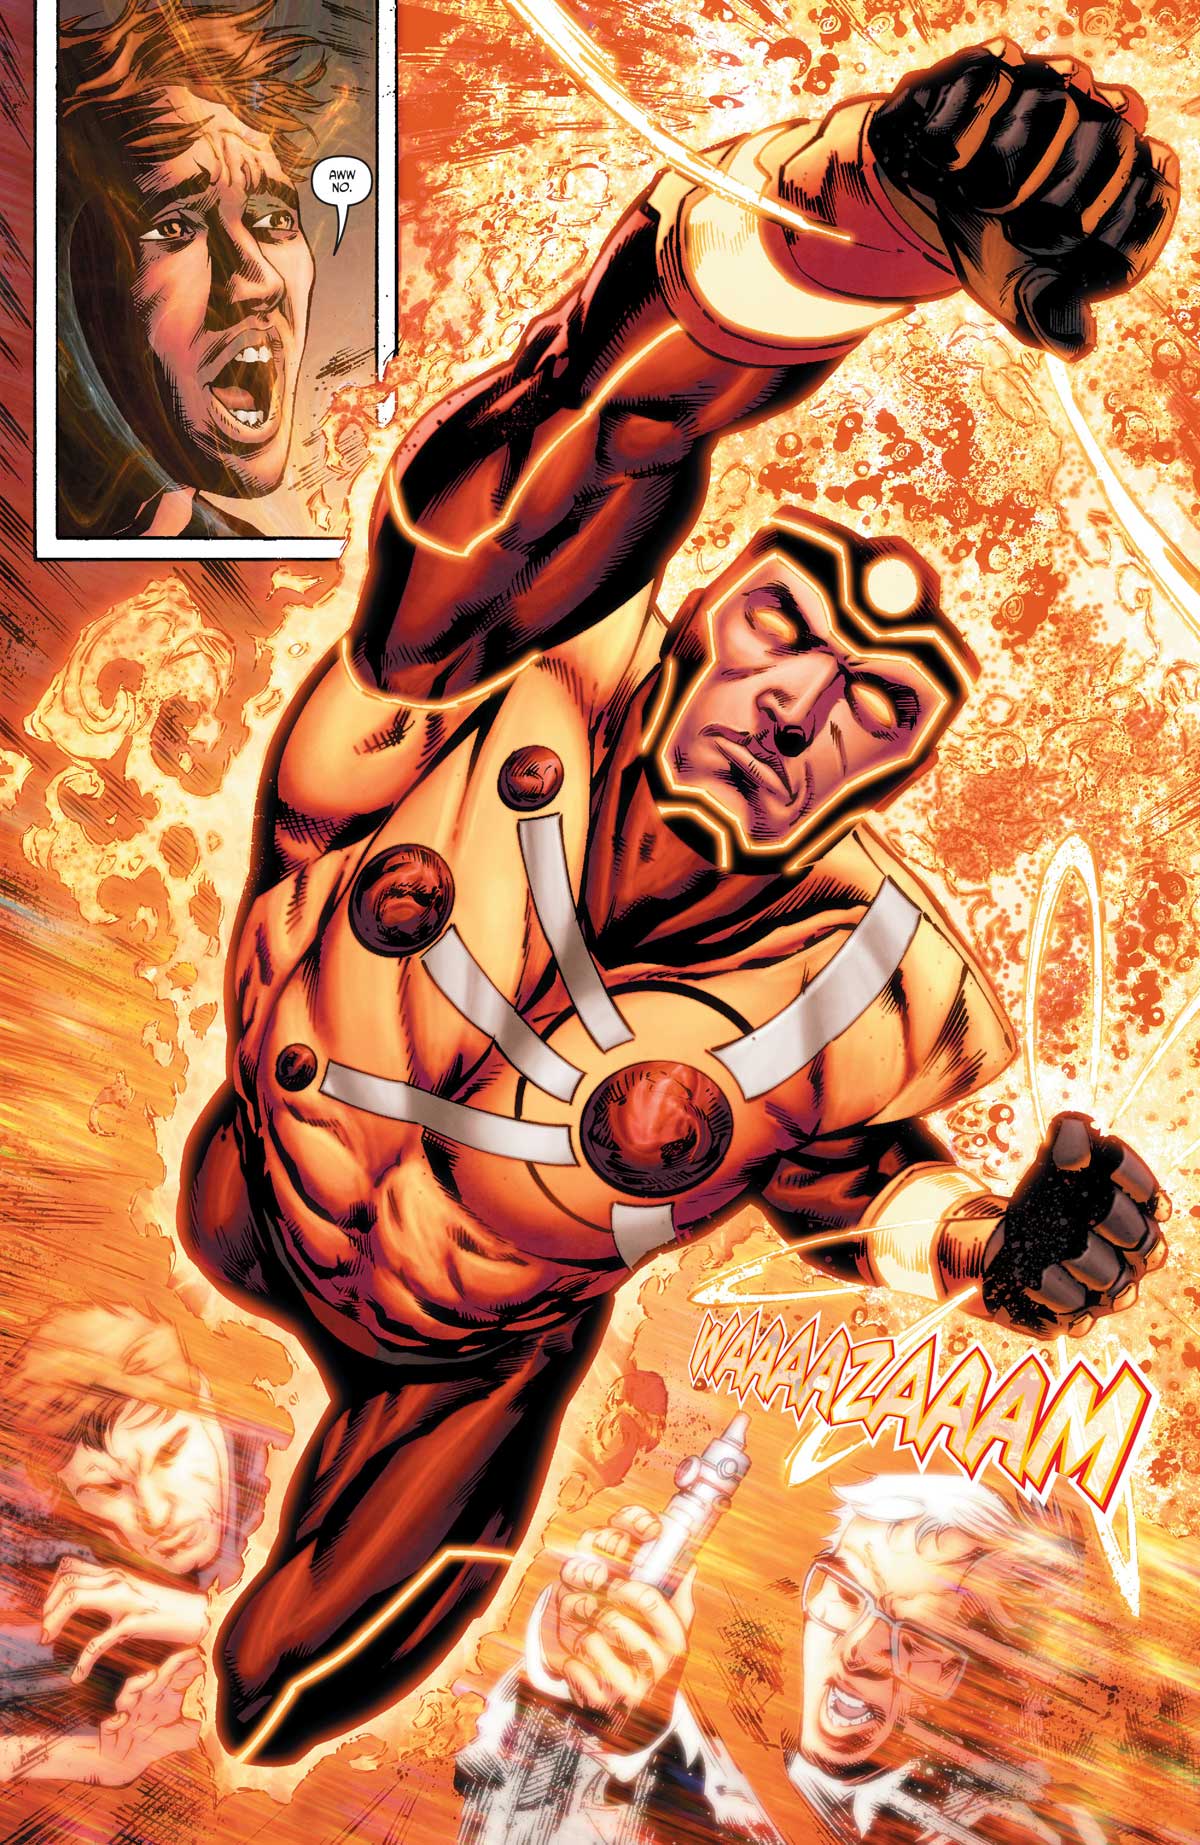 Firestorm in Legends of Tomorrow #2 by Gerry Conway, Eduardo Pansica, Rob Hunter